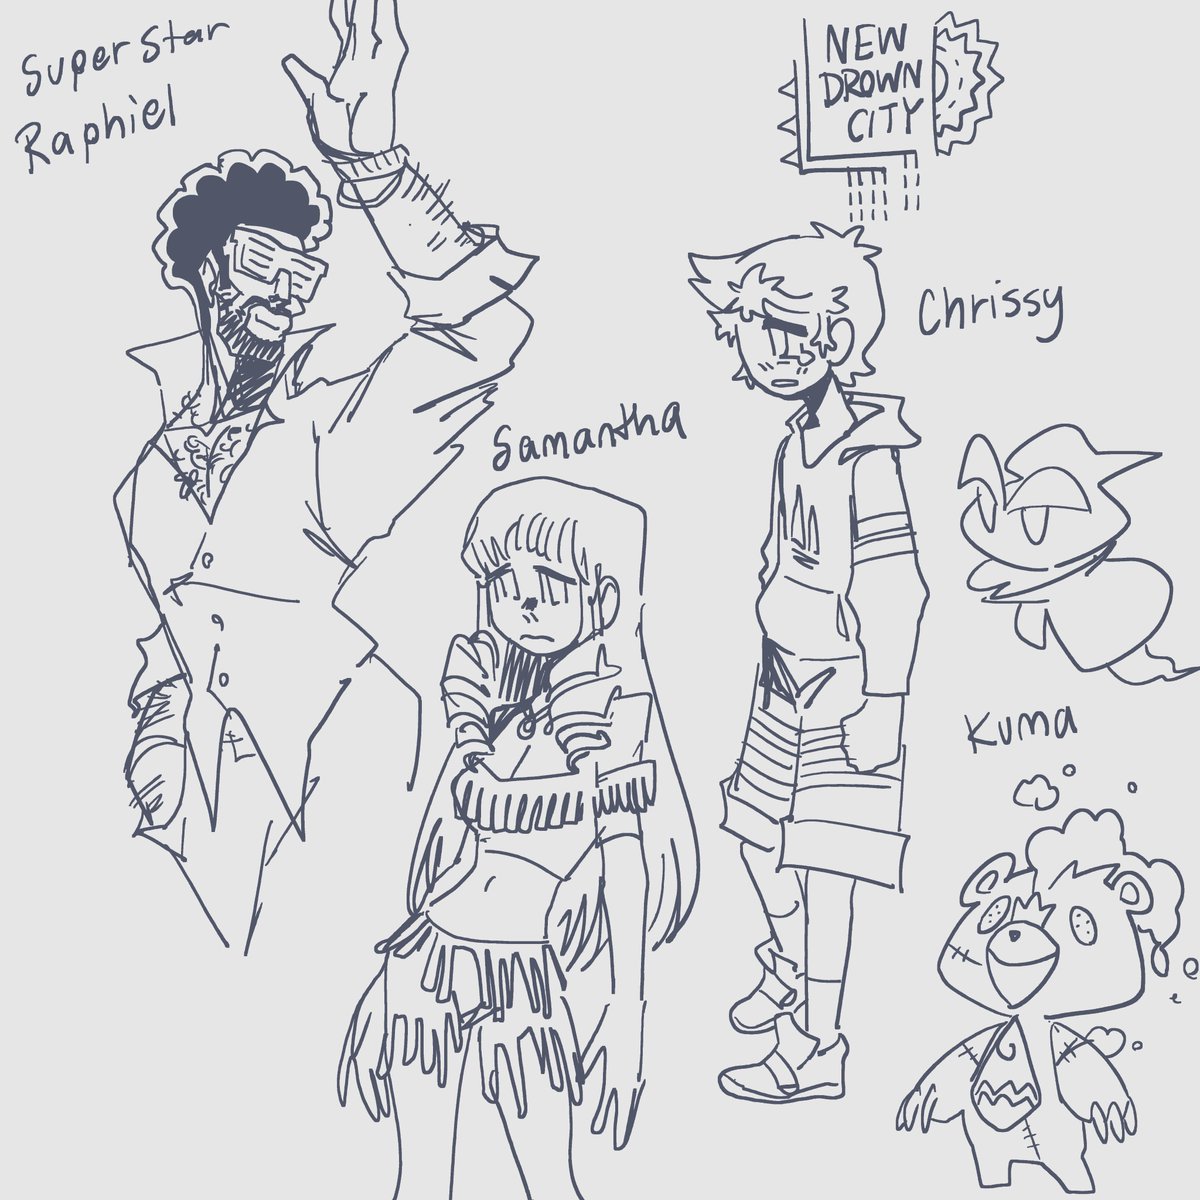 The gang of main characters from a story of mine, Mary and Vinyl, Sora an angel, and Zel (hes 17 so chill)